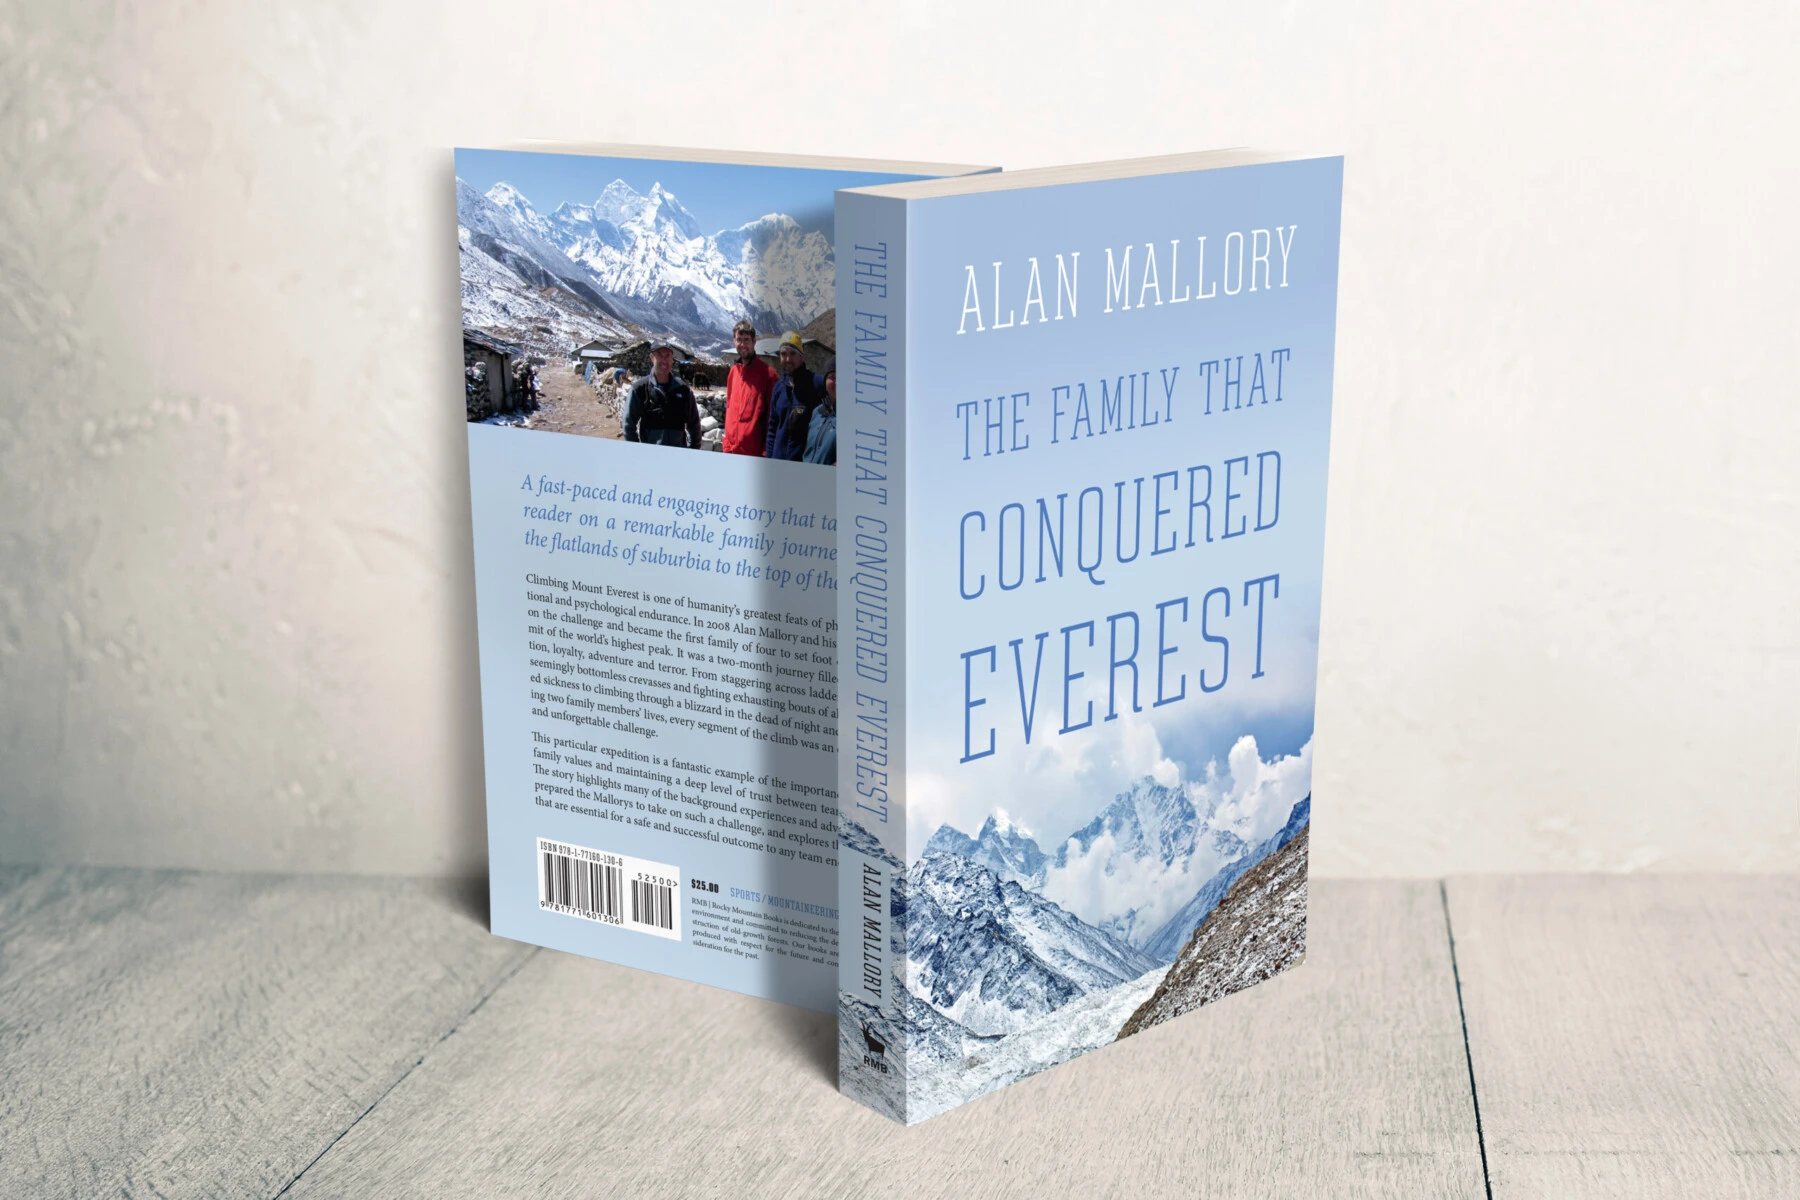 Alan Mallory: THE FAMILY THAT CONQUERED EVEREST